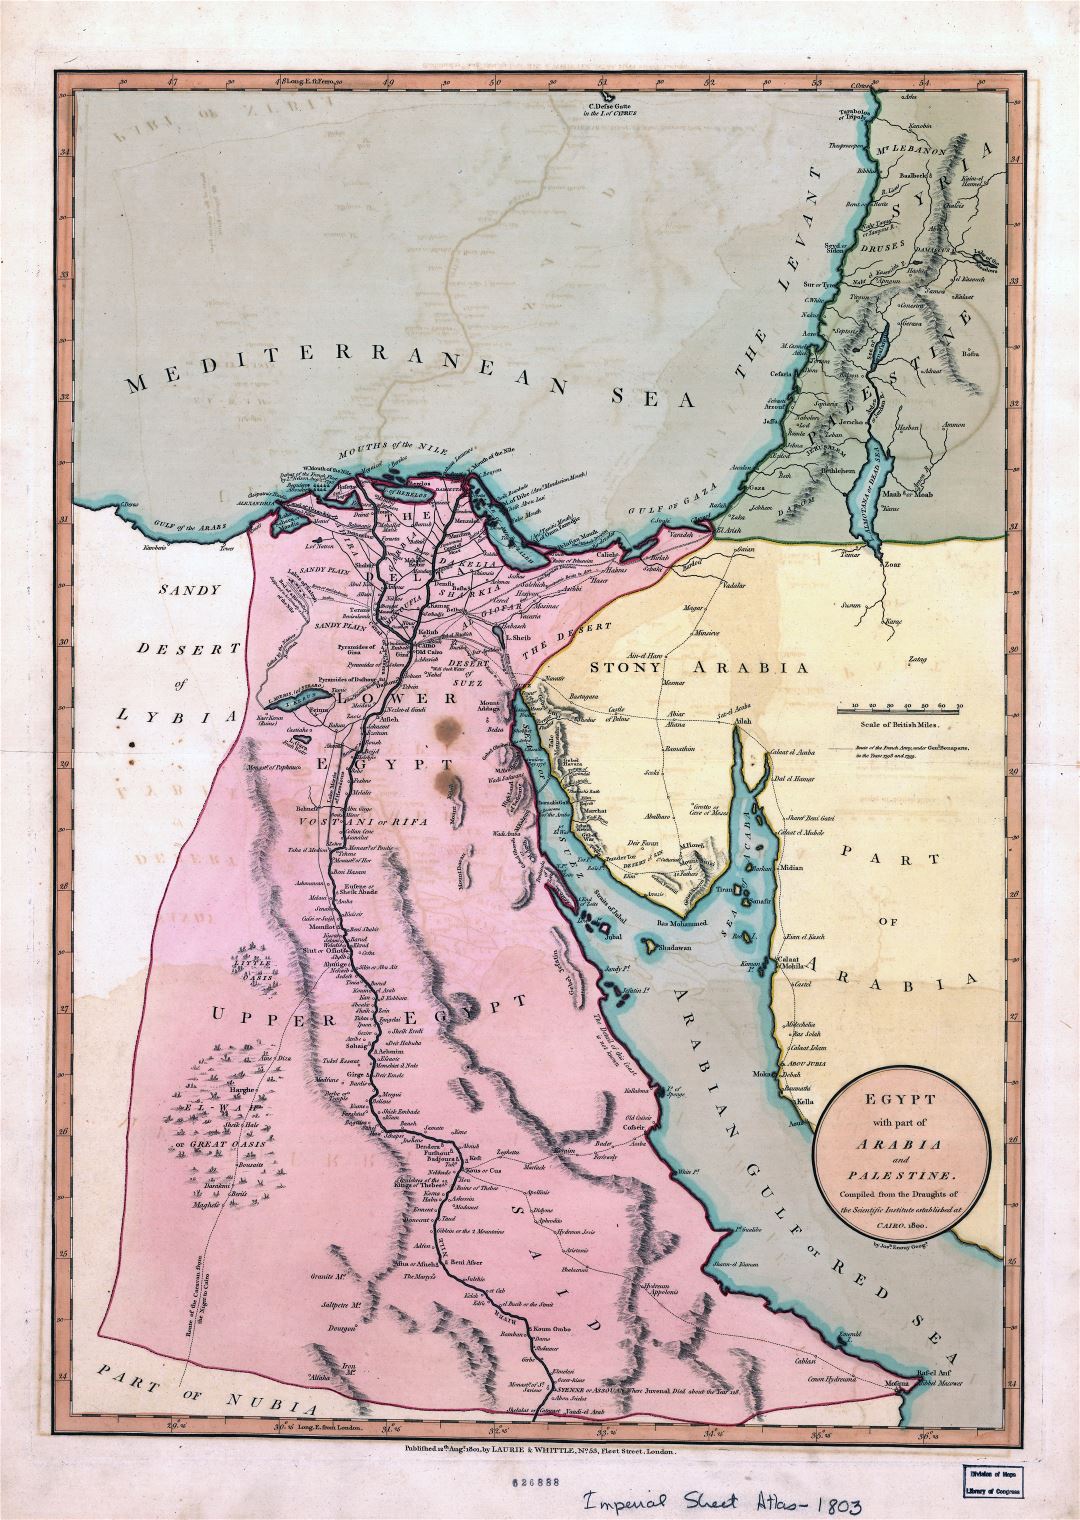 Large scale old map of Egypt with part of Arabia and Palestine - 1800